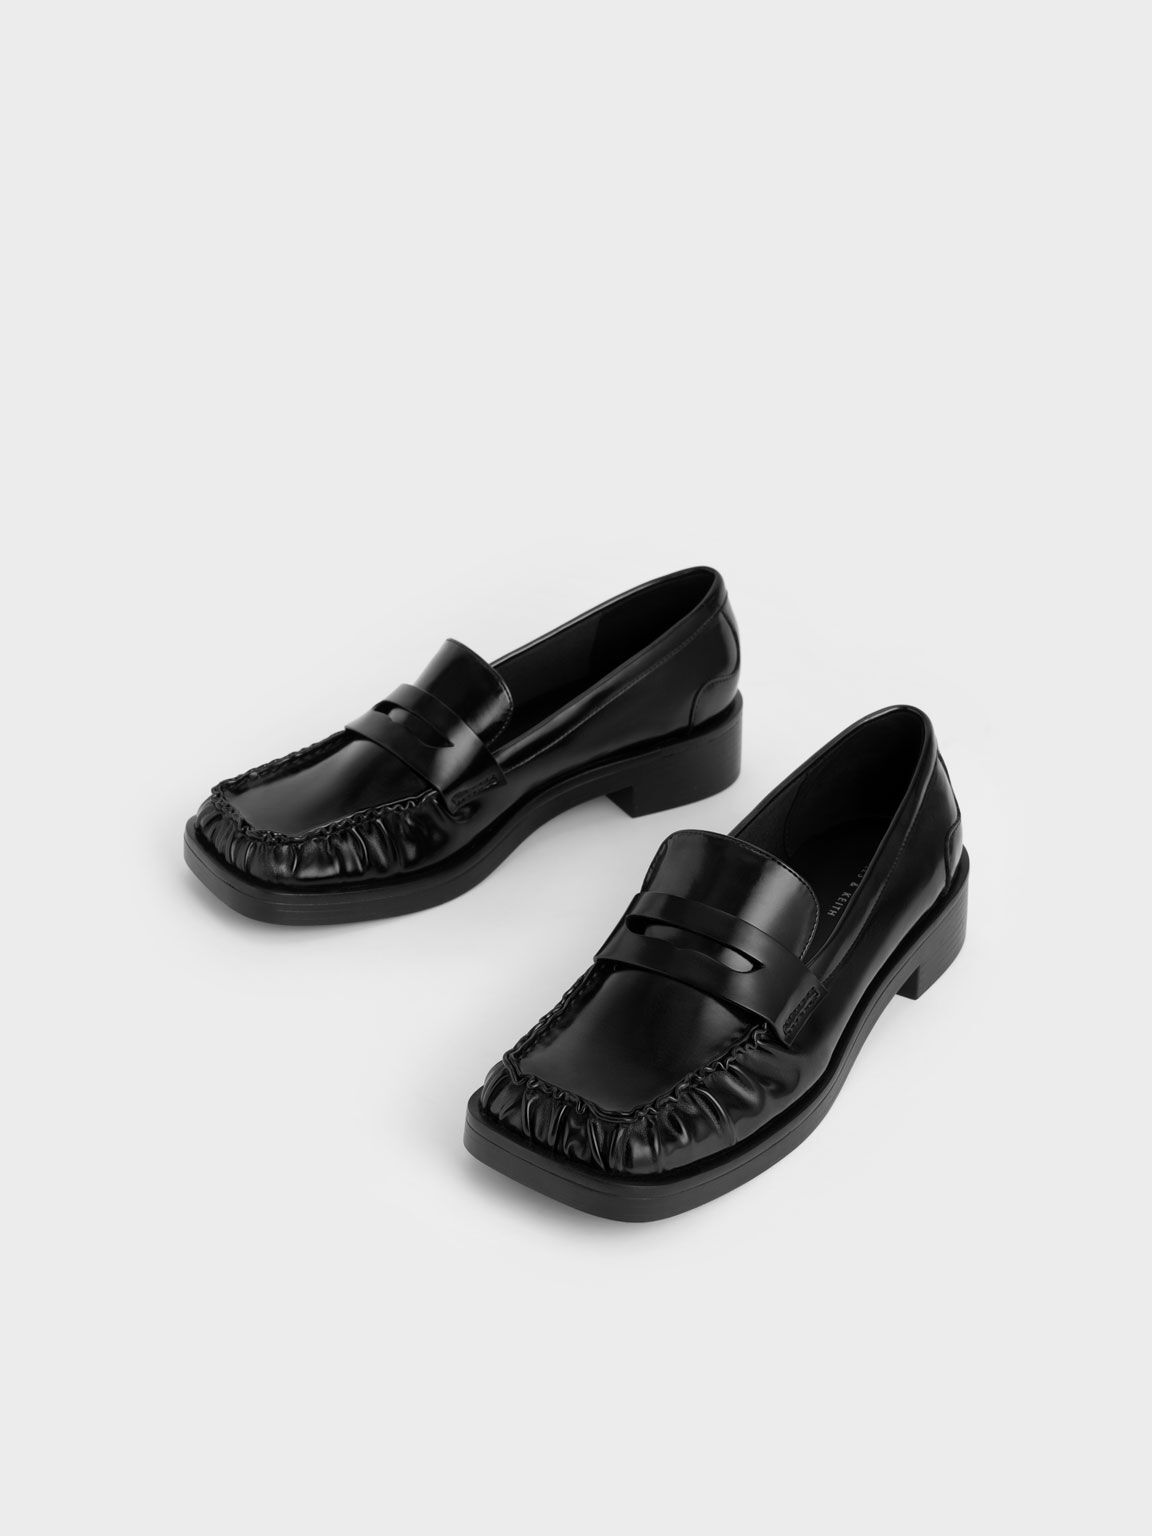 Ruched Square-Toe Loafers, Black, hi-res